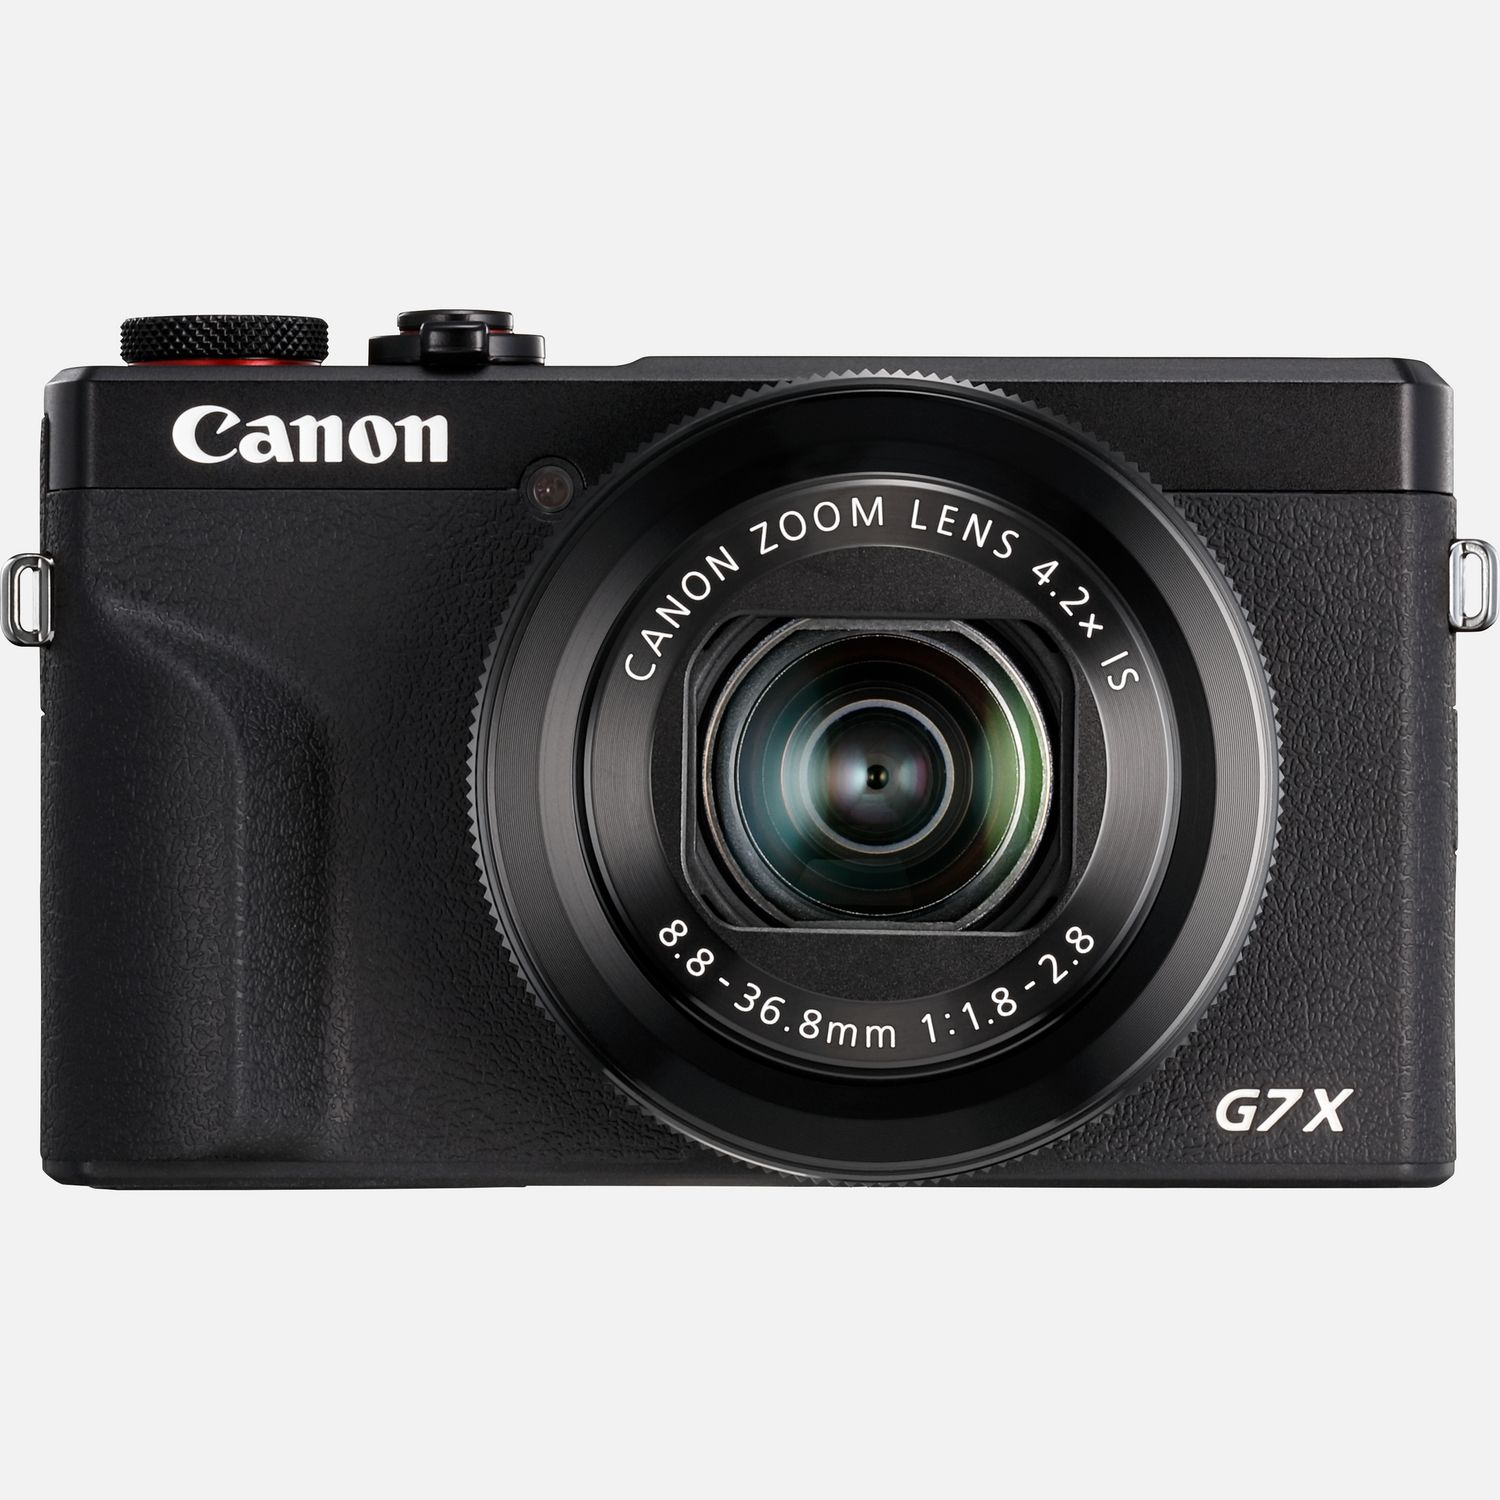 Canon PowerShot G7 X Mark III Compact Camera, Black in Wi-Fi Cameras at Canon